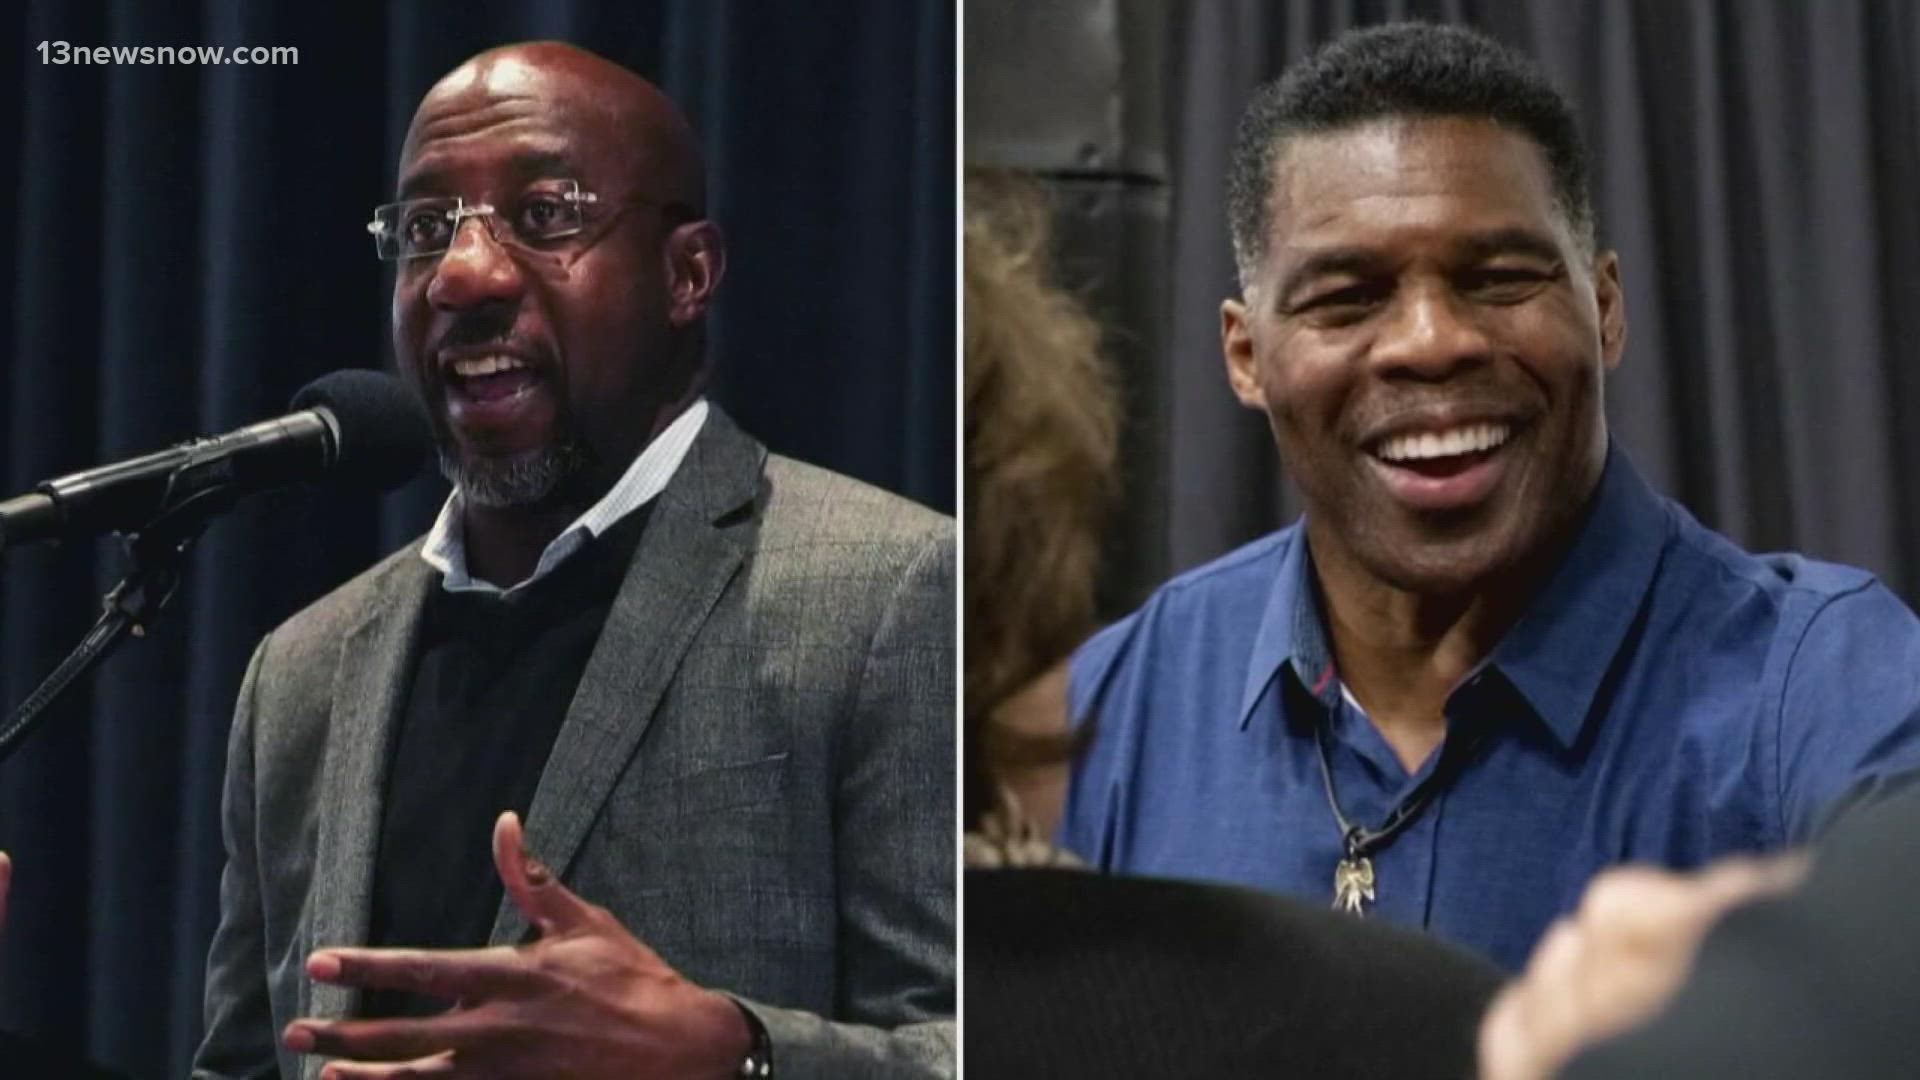 Incumbent Democrat Raphael Warnock and Republican challenger Herschel Walker going head-to-head, both of them campaigning hard down to the wire.